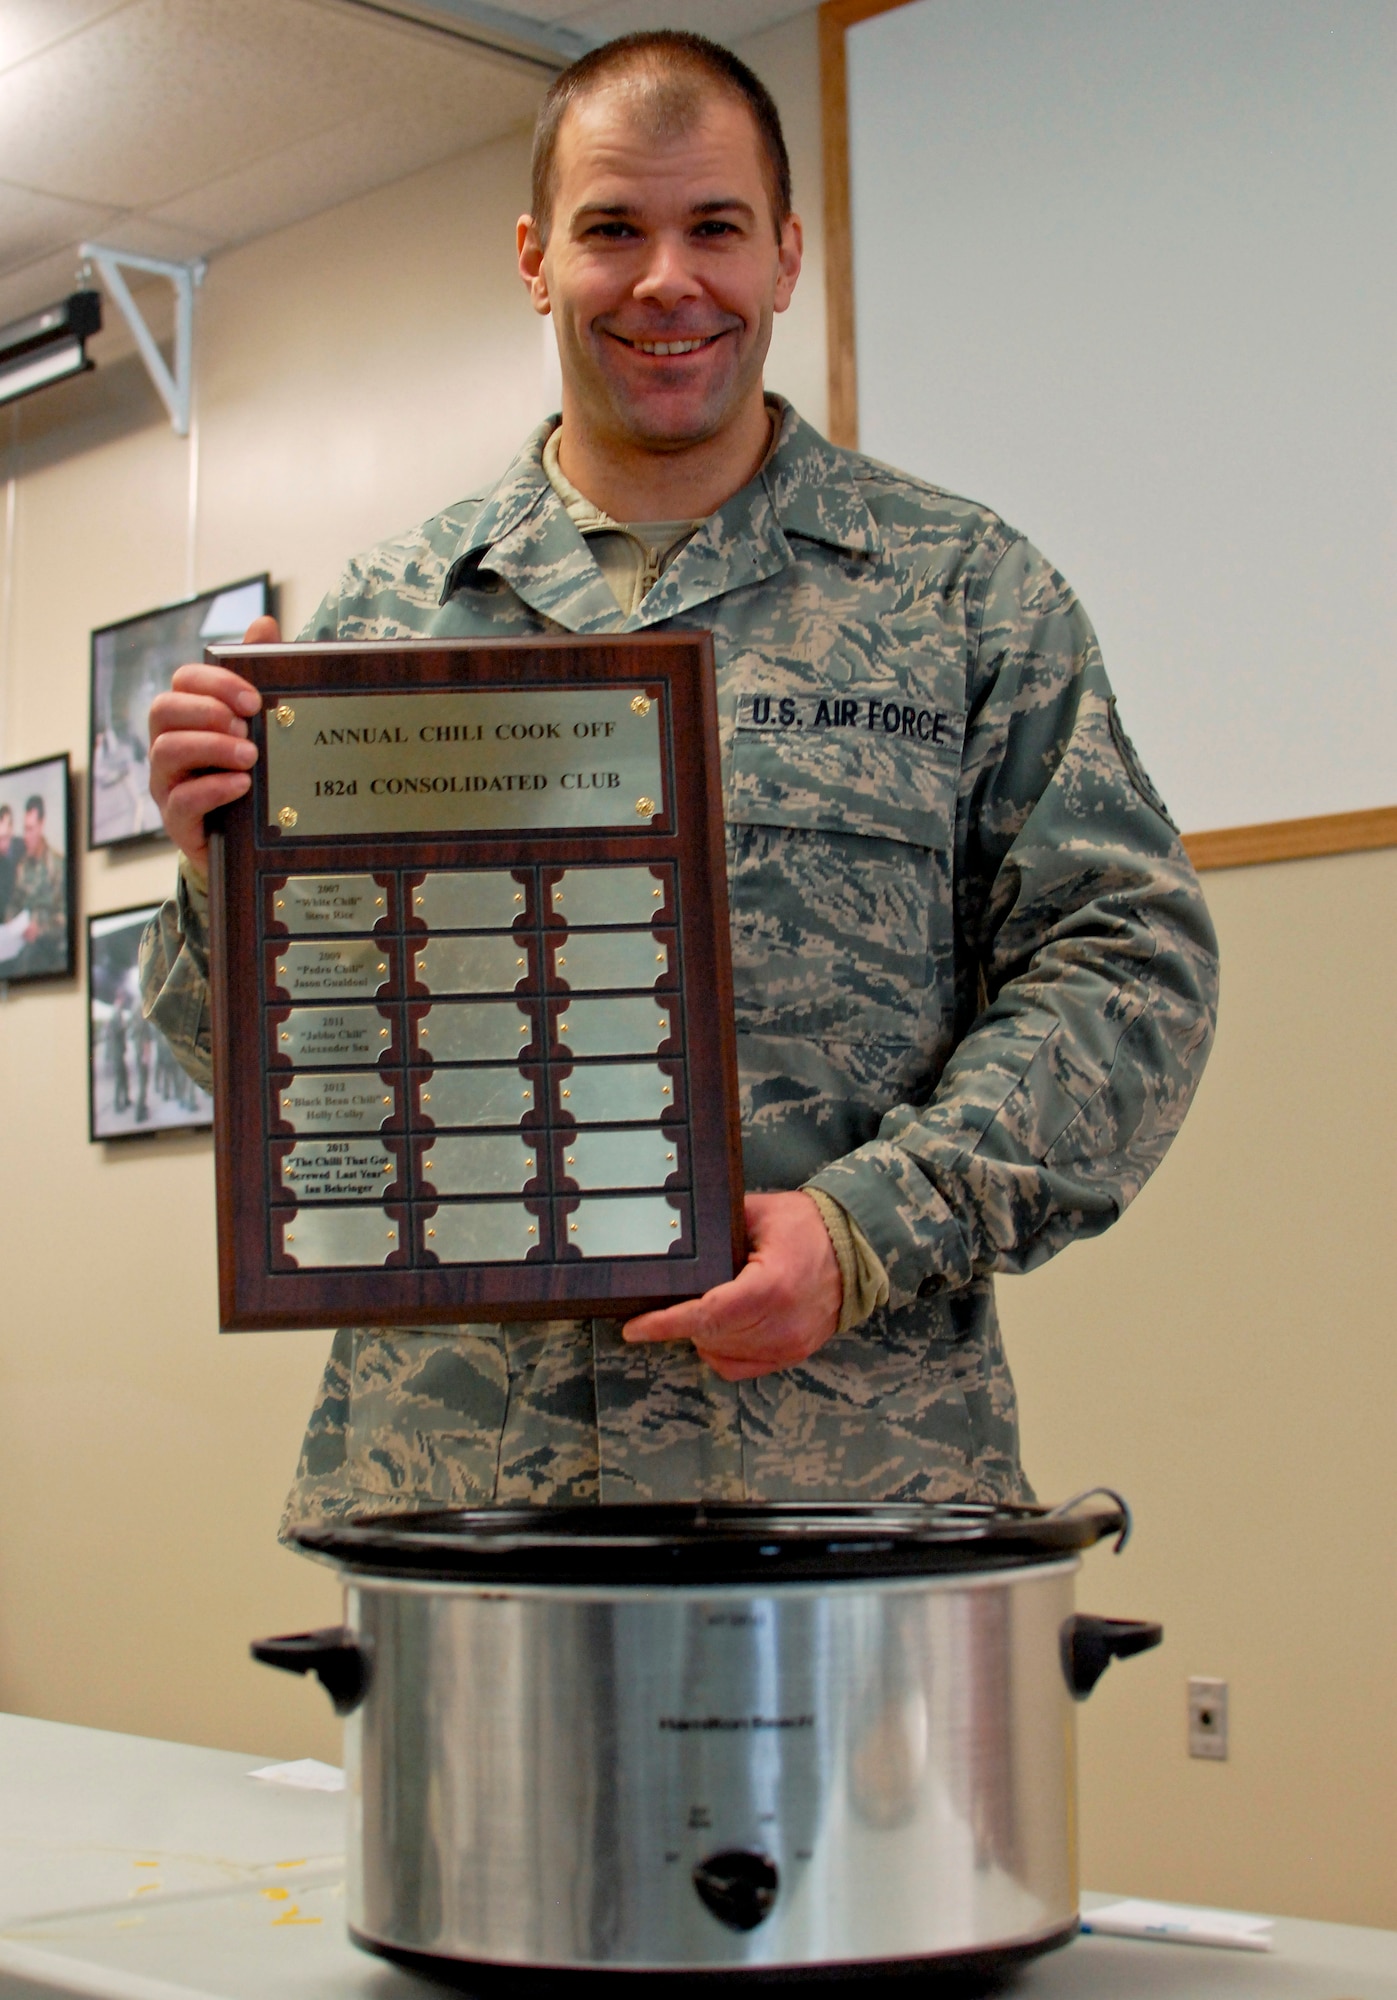 U.S. Air Force Tech. Sgt. Alex R. Sea, vehicle equipment maintenance specialist with the 182nd Logistics Readiness Squadron, displays the plaque of winners after the sixth-annual chili cook off at the 182nd Airlift Wing, Peoria, Ill., Jan. 8, 2014. The competition placed 13 contestants and their homemade chili recipes against each other to compete for best look and smell, best consistency, and best taste. Sea won in both the best consistency and most overall points categories for his Jabbo Chili recipe. He was awarded a five-year membership to the wing’s consolidated club and had his name added to the winners’ plaque. The event brought out approximately 120 unit members to sample the various white and traditional red entries, and raised $490 in support of operating the wing’s consolidated club. Sea enjoys the yearly event because he gets to have good chili with good people, he said. “It’s a good way to get out and mingle and talk to the people you don’t usually see on a day-to-day basis.” (U.S. Air National Guard photo by Staff Sgt. Lealan Buehrer/Released. Image was cropped to emphasize subject.